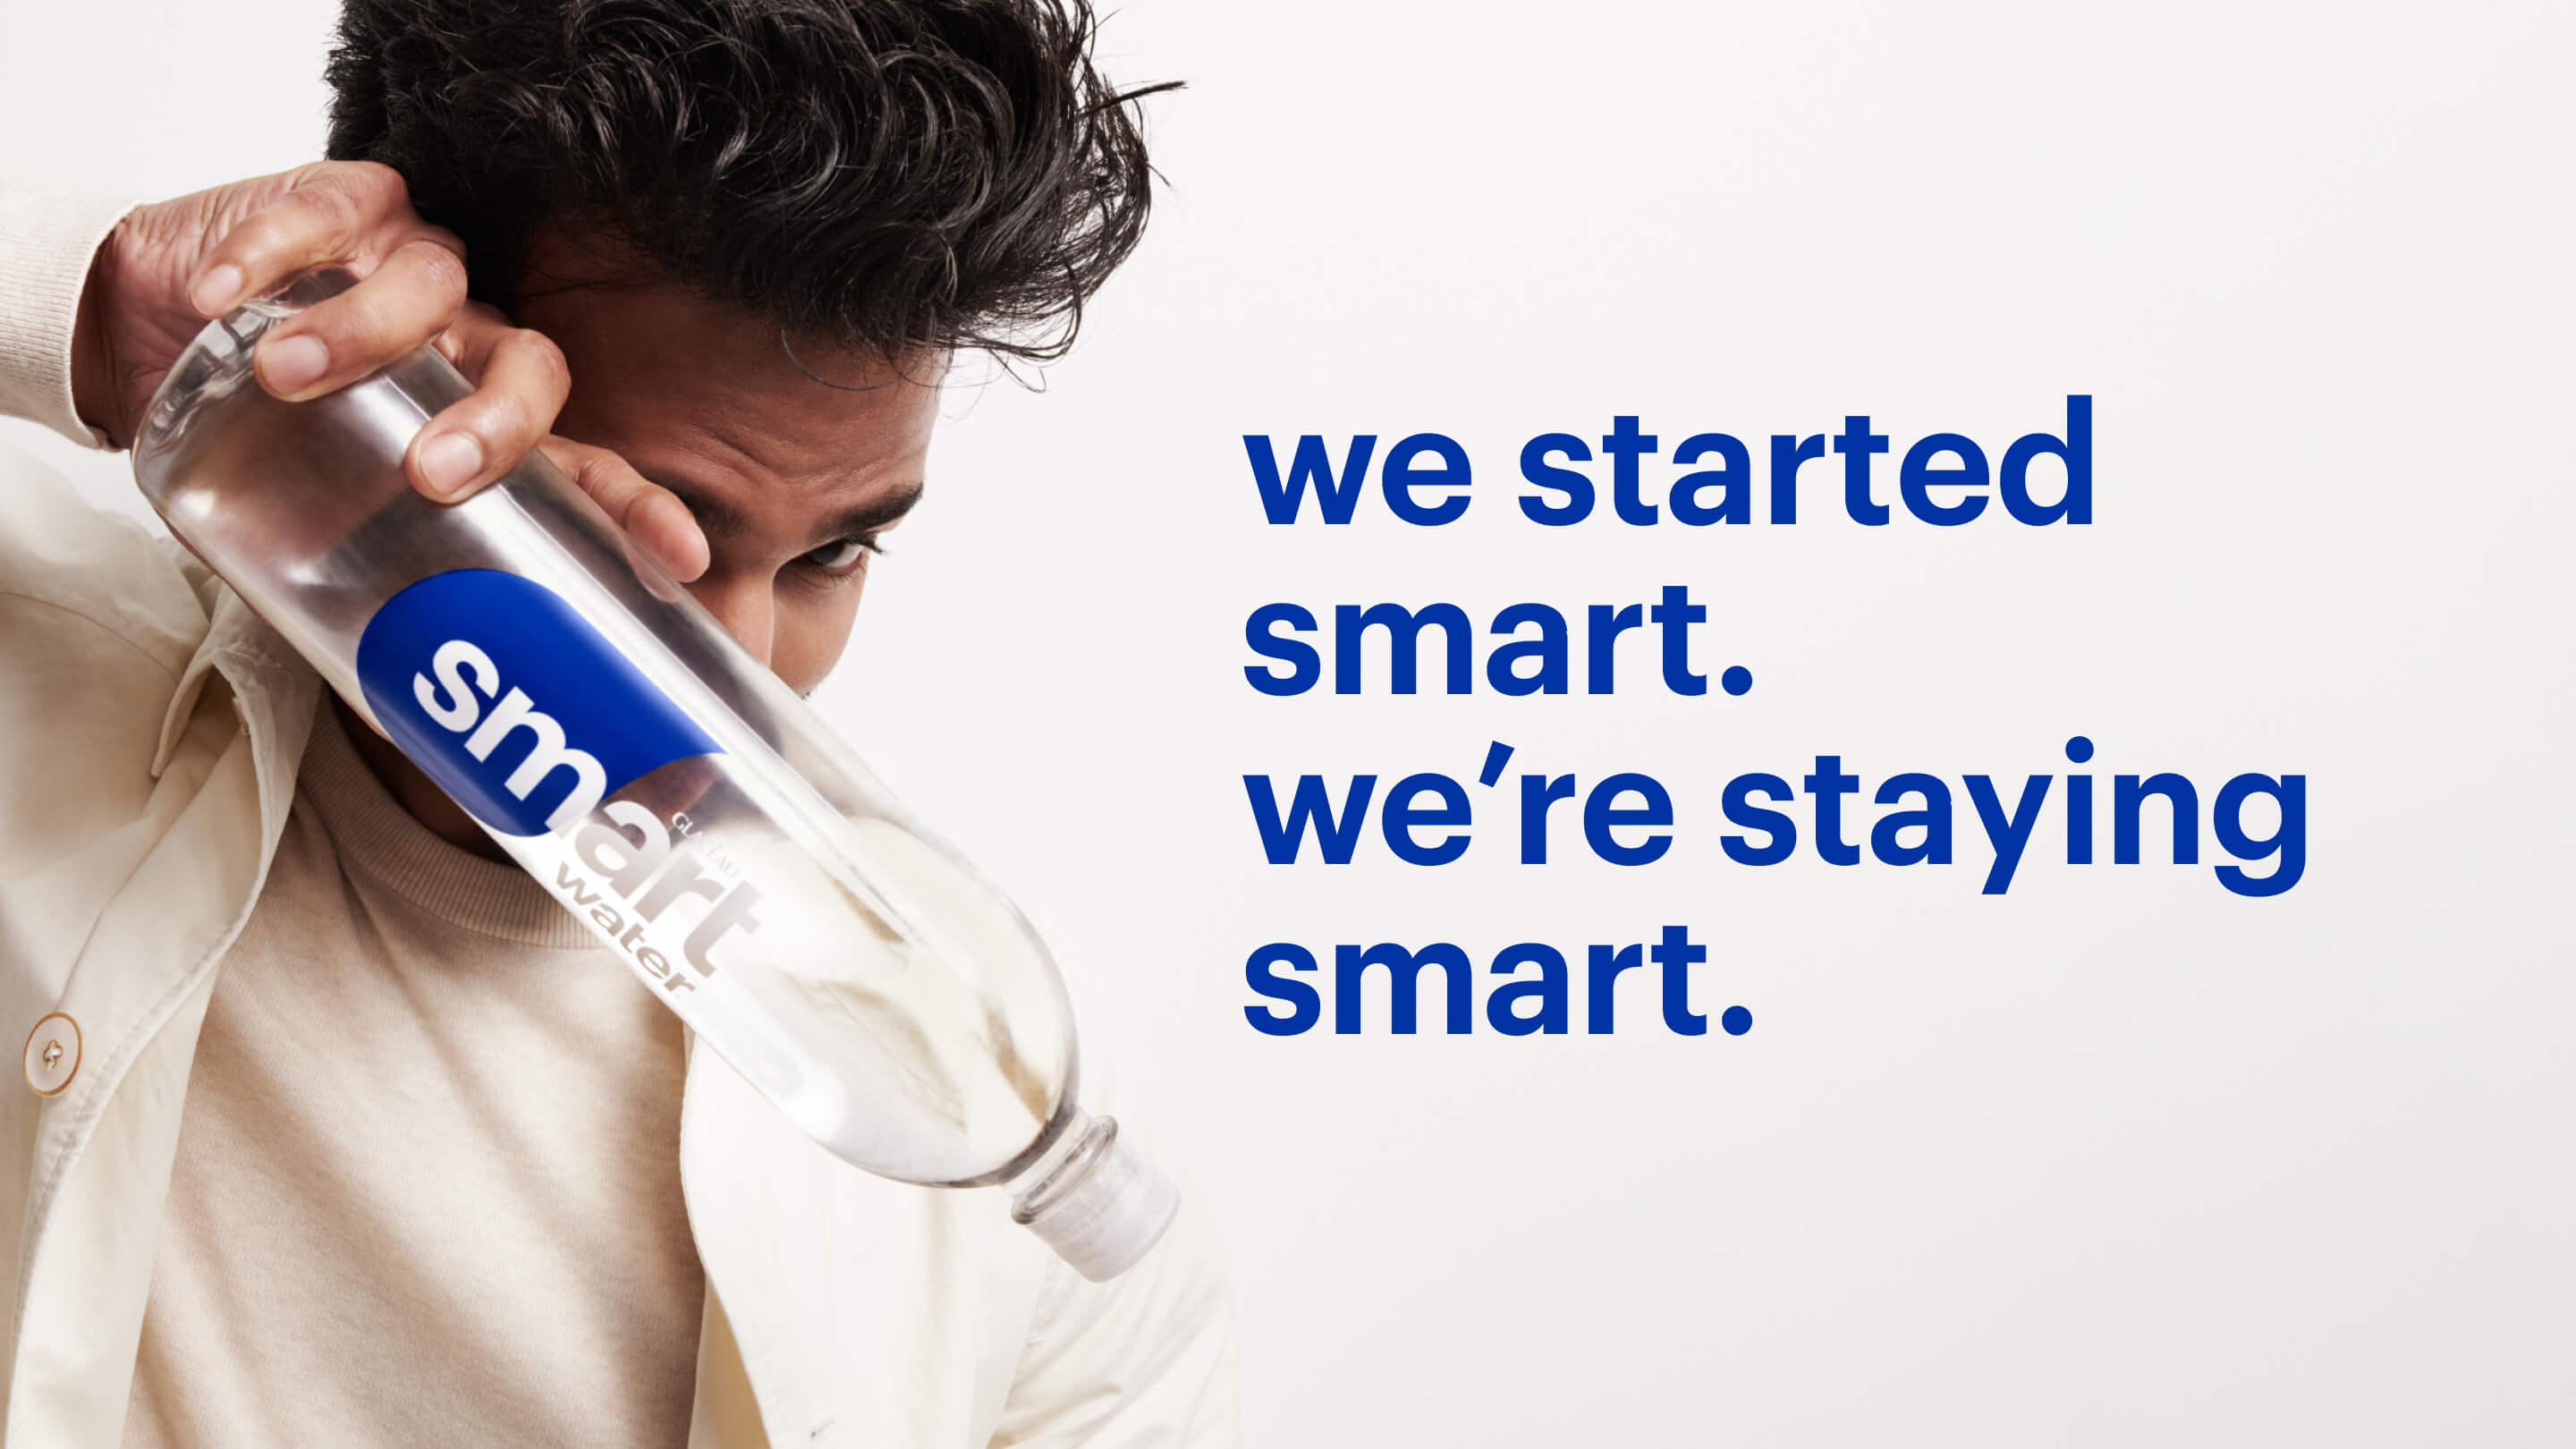 Man holding a Glacéau Smartwater bottle in front of his face right next to the phrase "we start smart. we're staying smart".